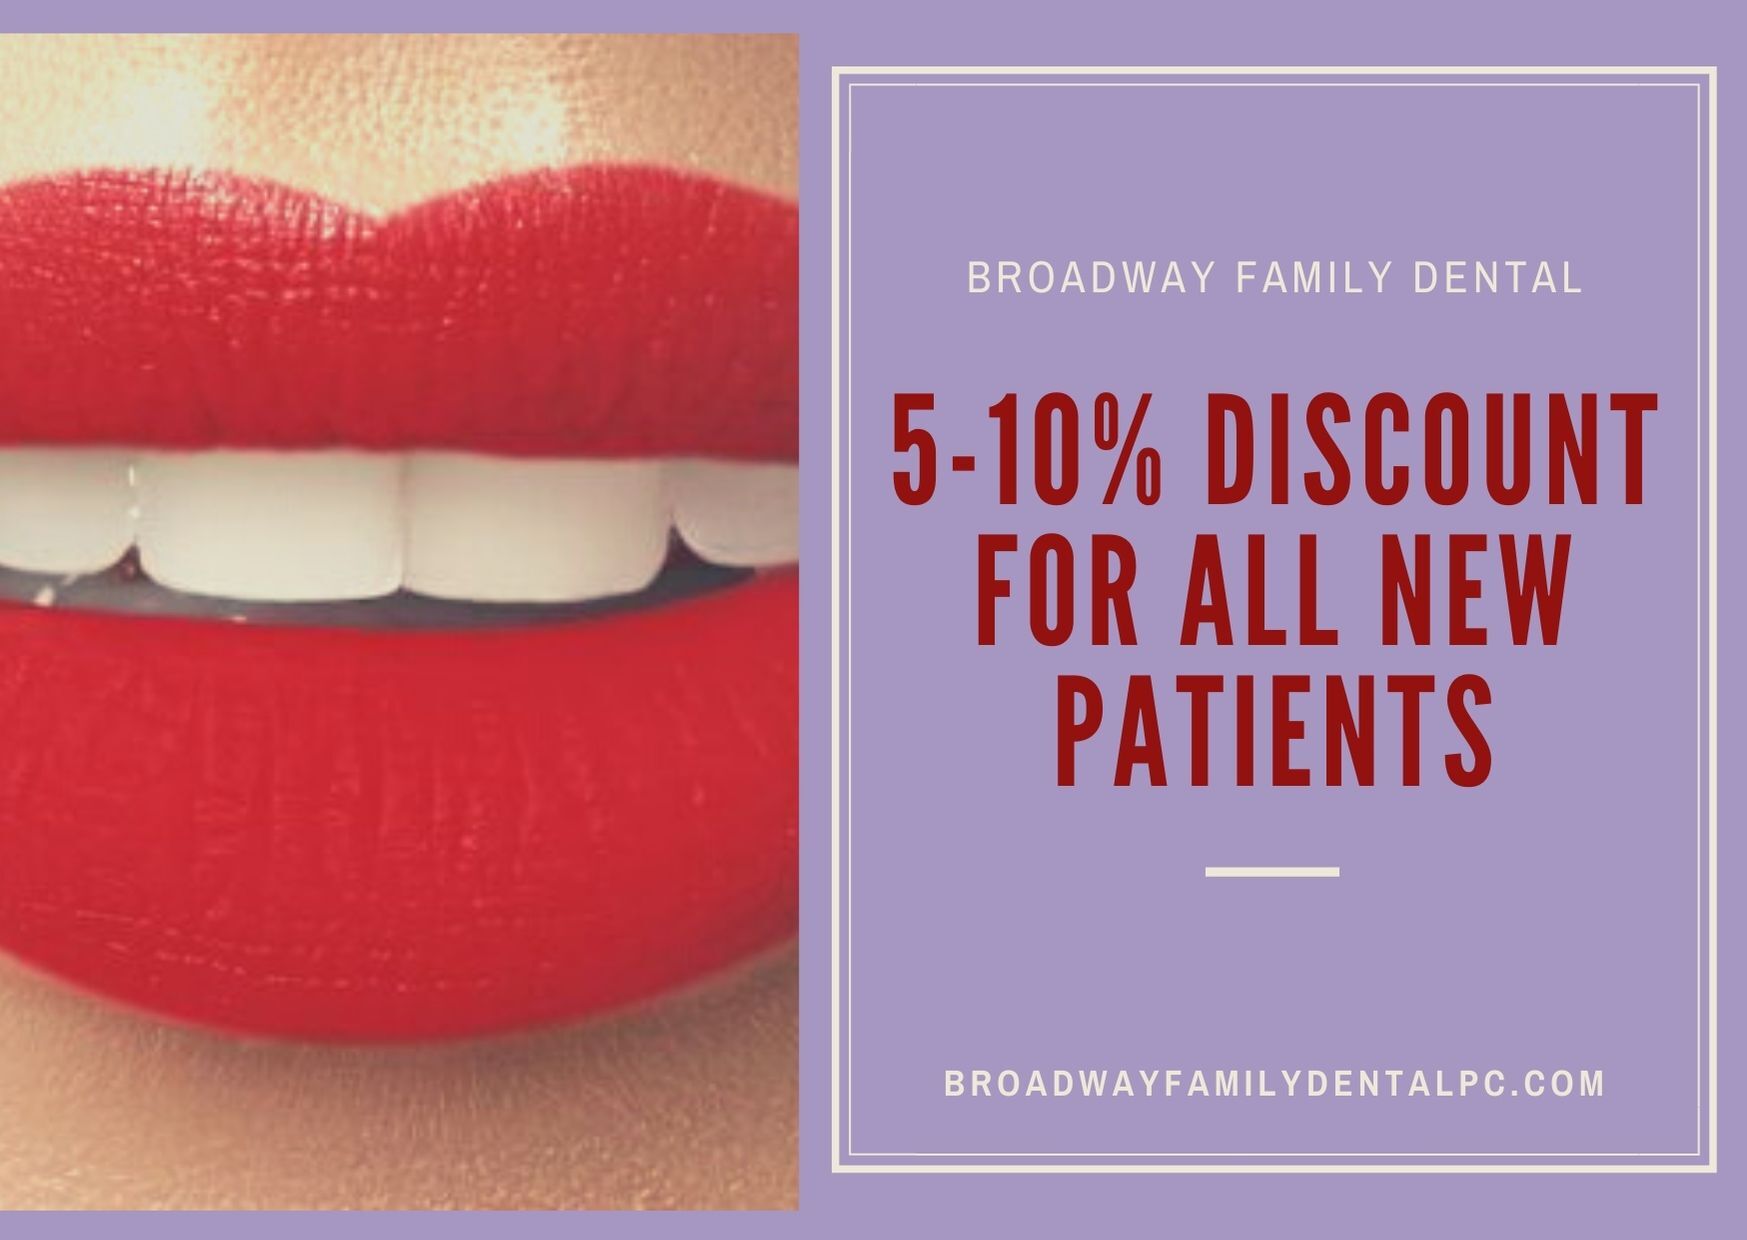 Broadway Family Dental offers a discount